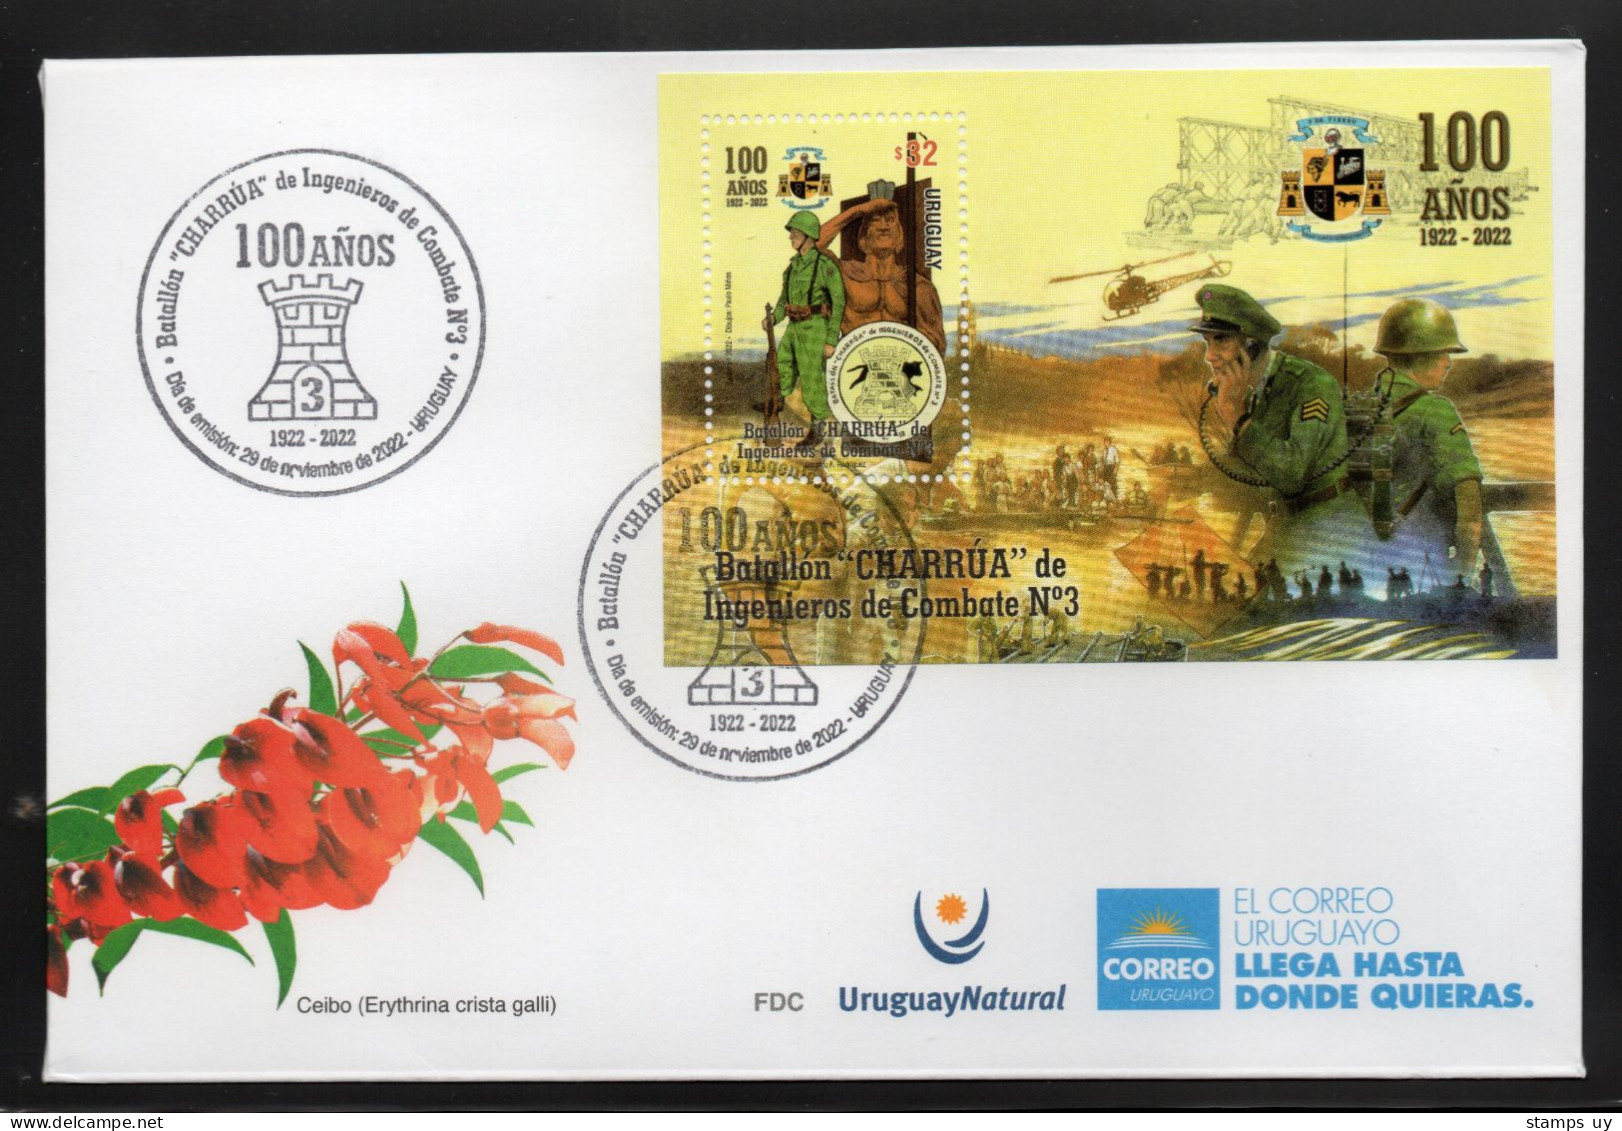 URUGUAY 2023 (Militar, Comunication, Engineer, Helicopter, Bell 47G, Train, Radio, Indigenous) - 5x FDCs START 20% OFF - Vaches